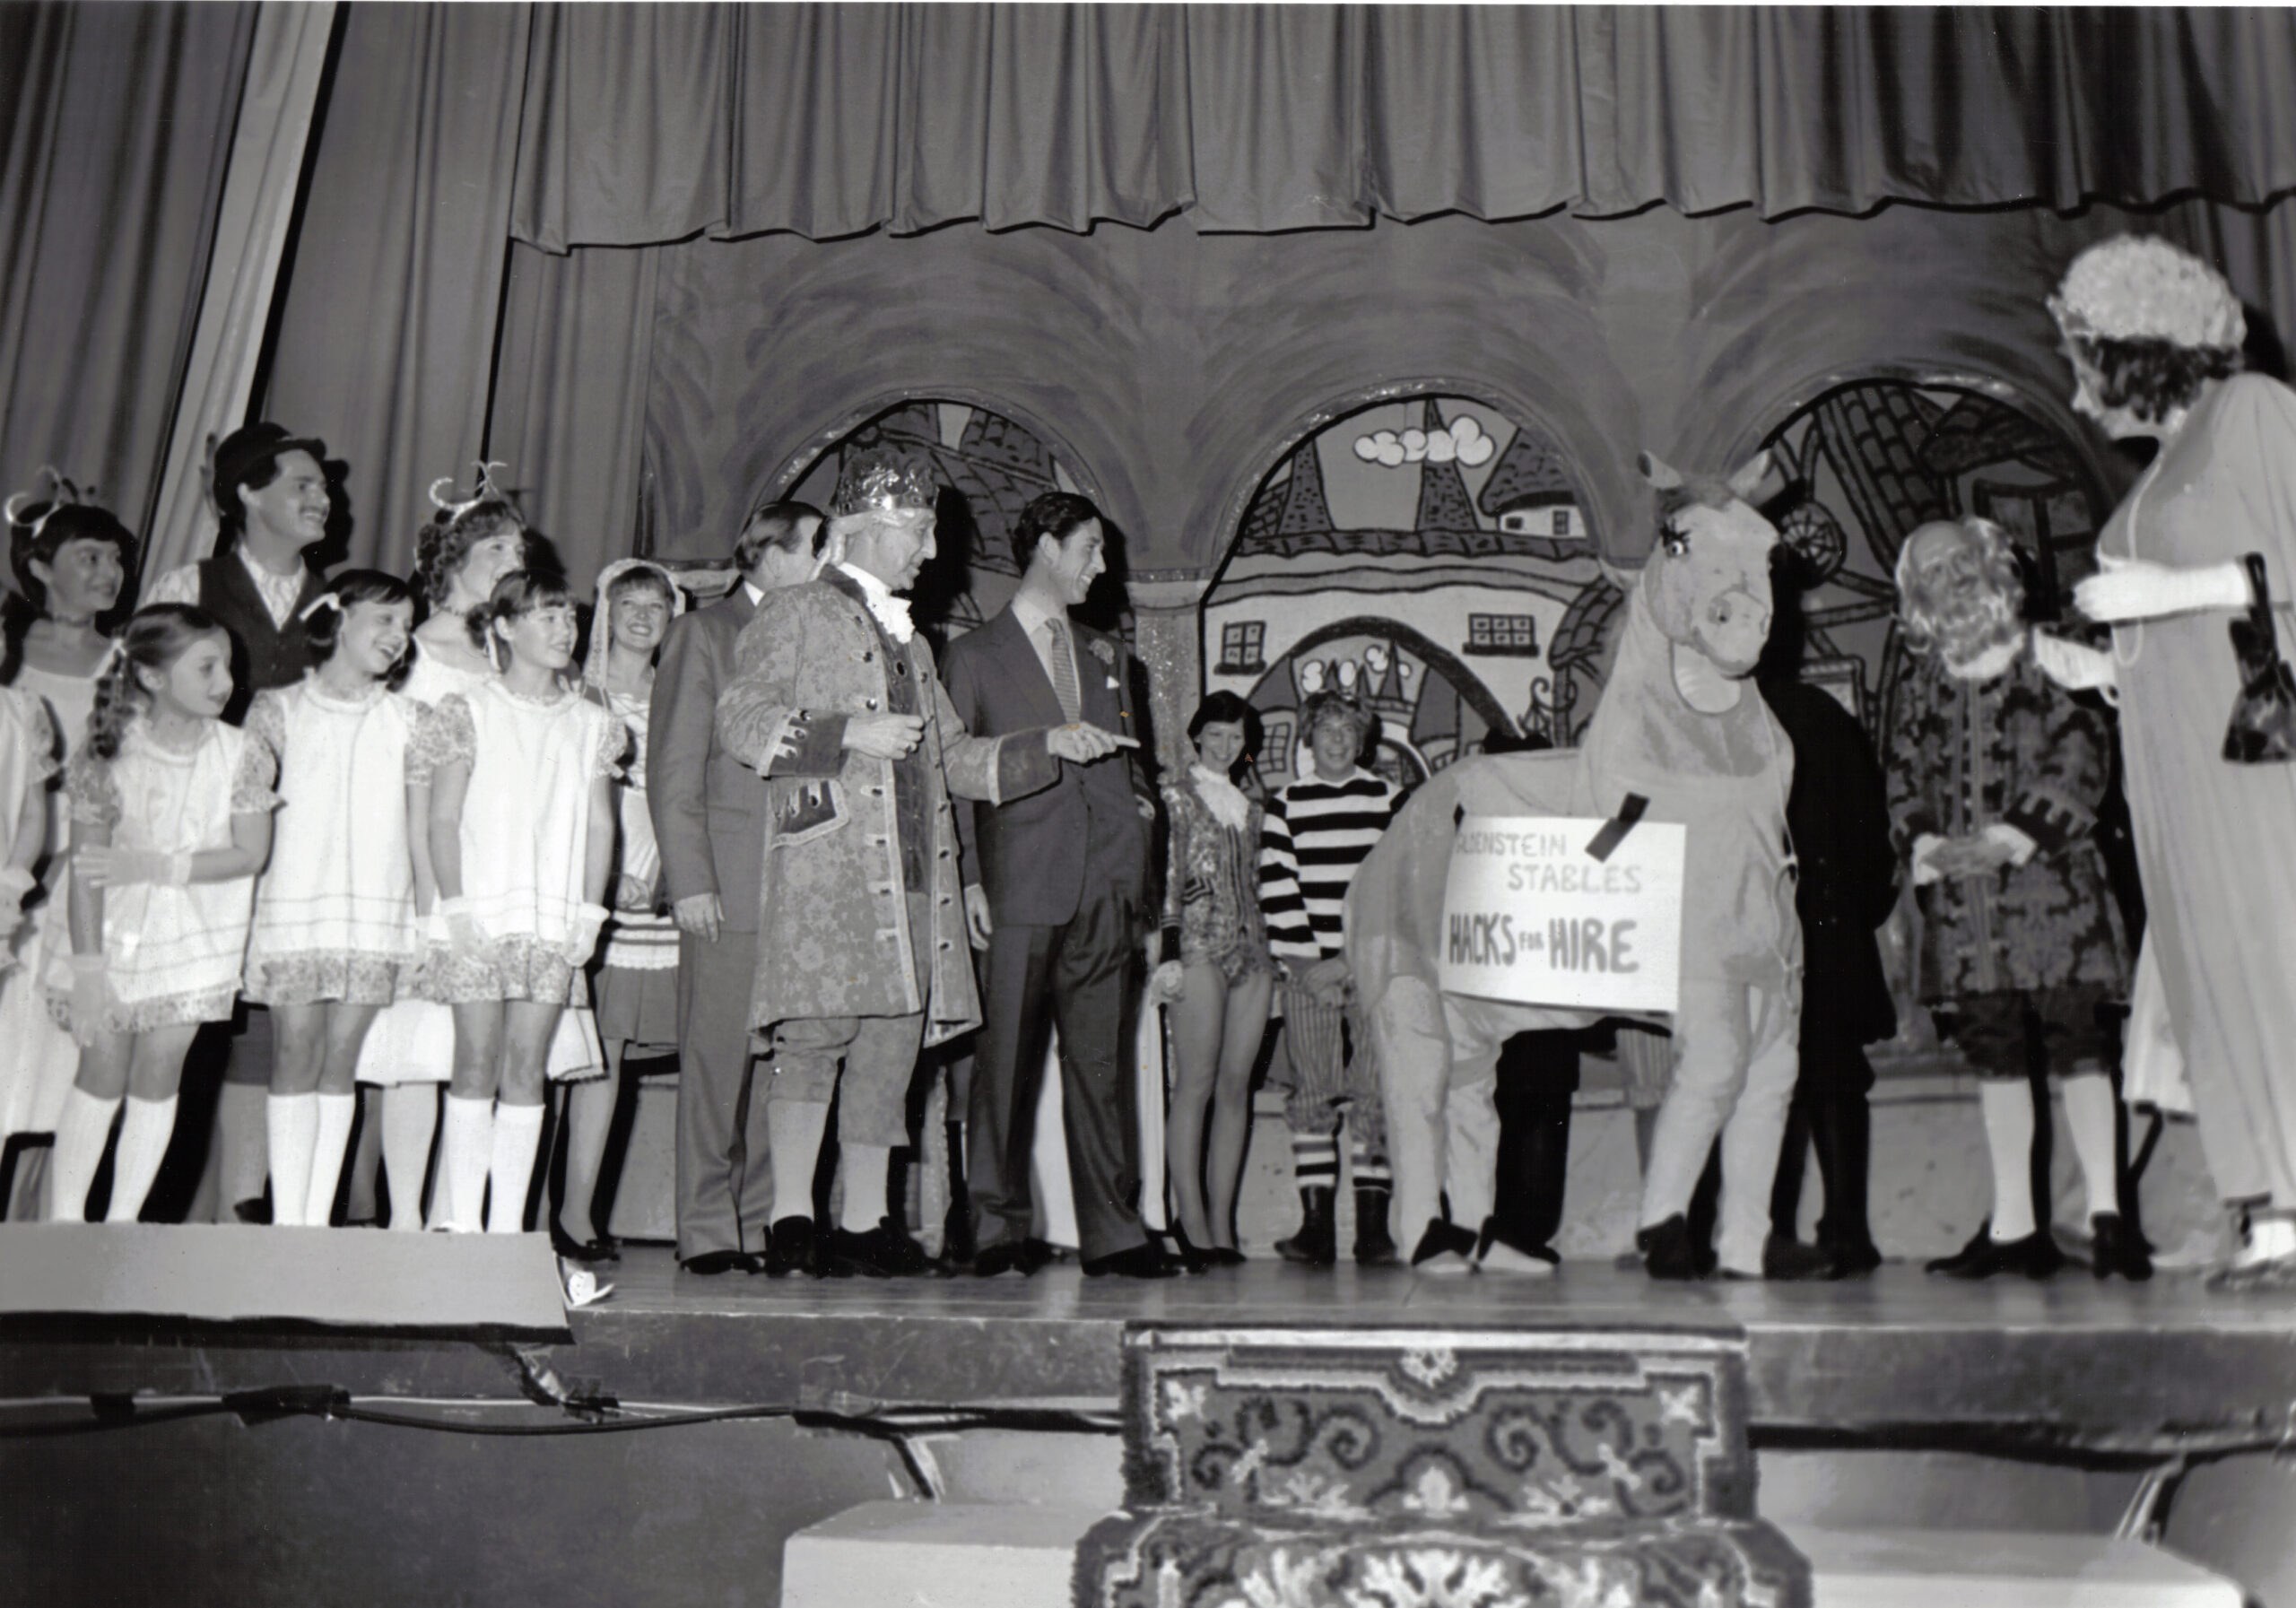 A black and white photo of HM King Charles III on the Theatre stage with the panto cast, including the youth chorus, king and a pantomime horse.